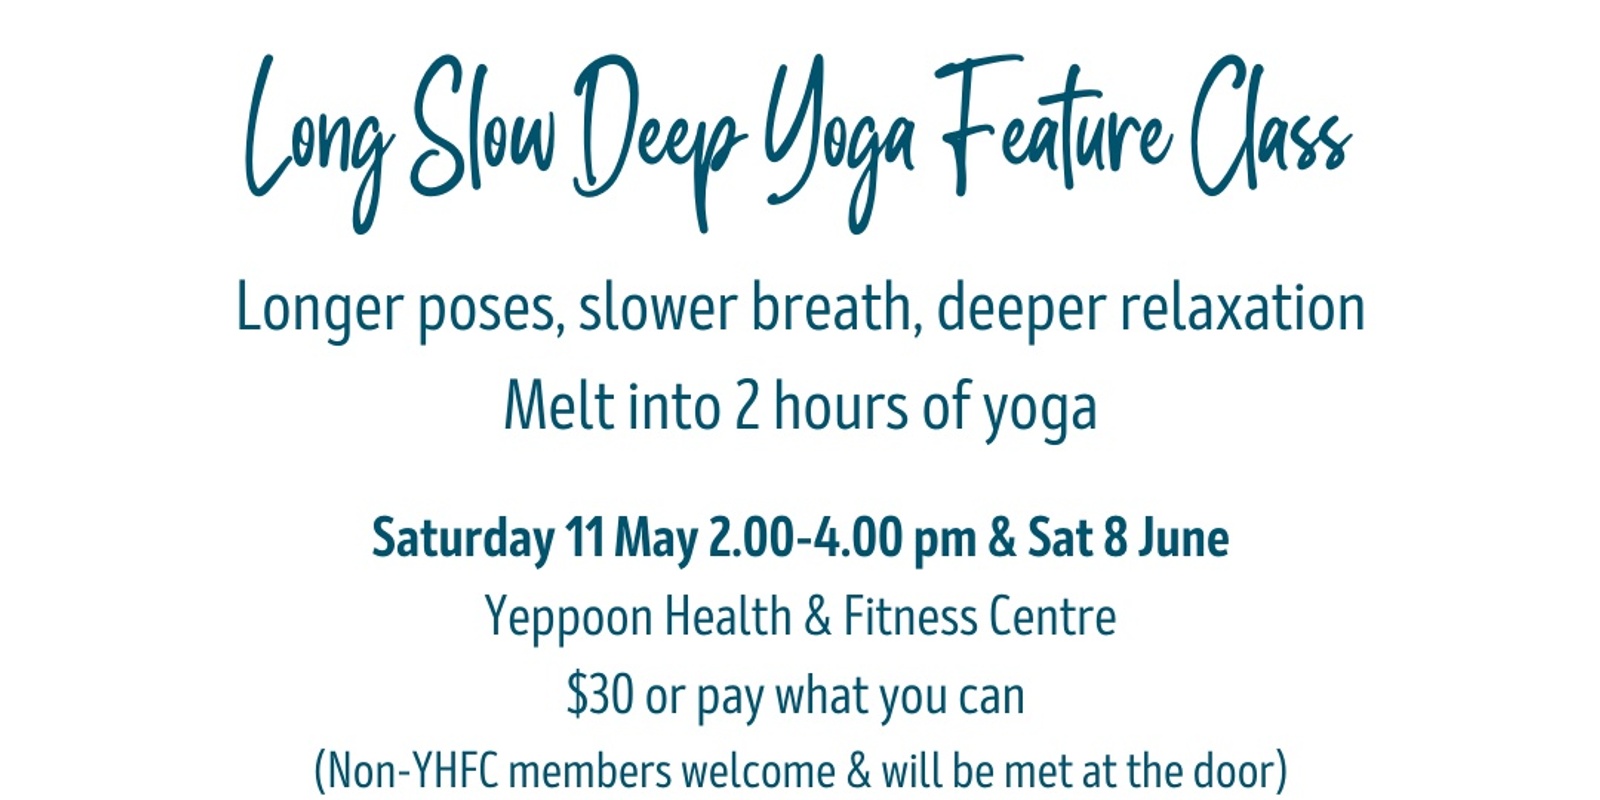 Banner image for Long Slow Deep 2 hour Feature Yoga Class